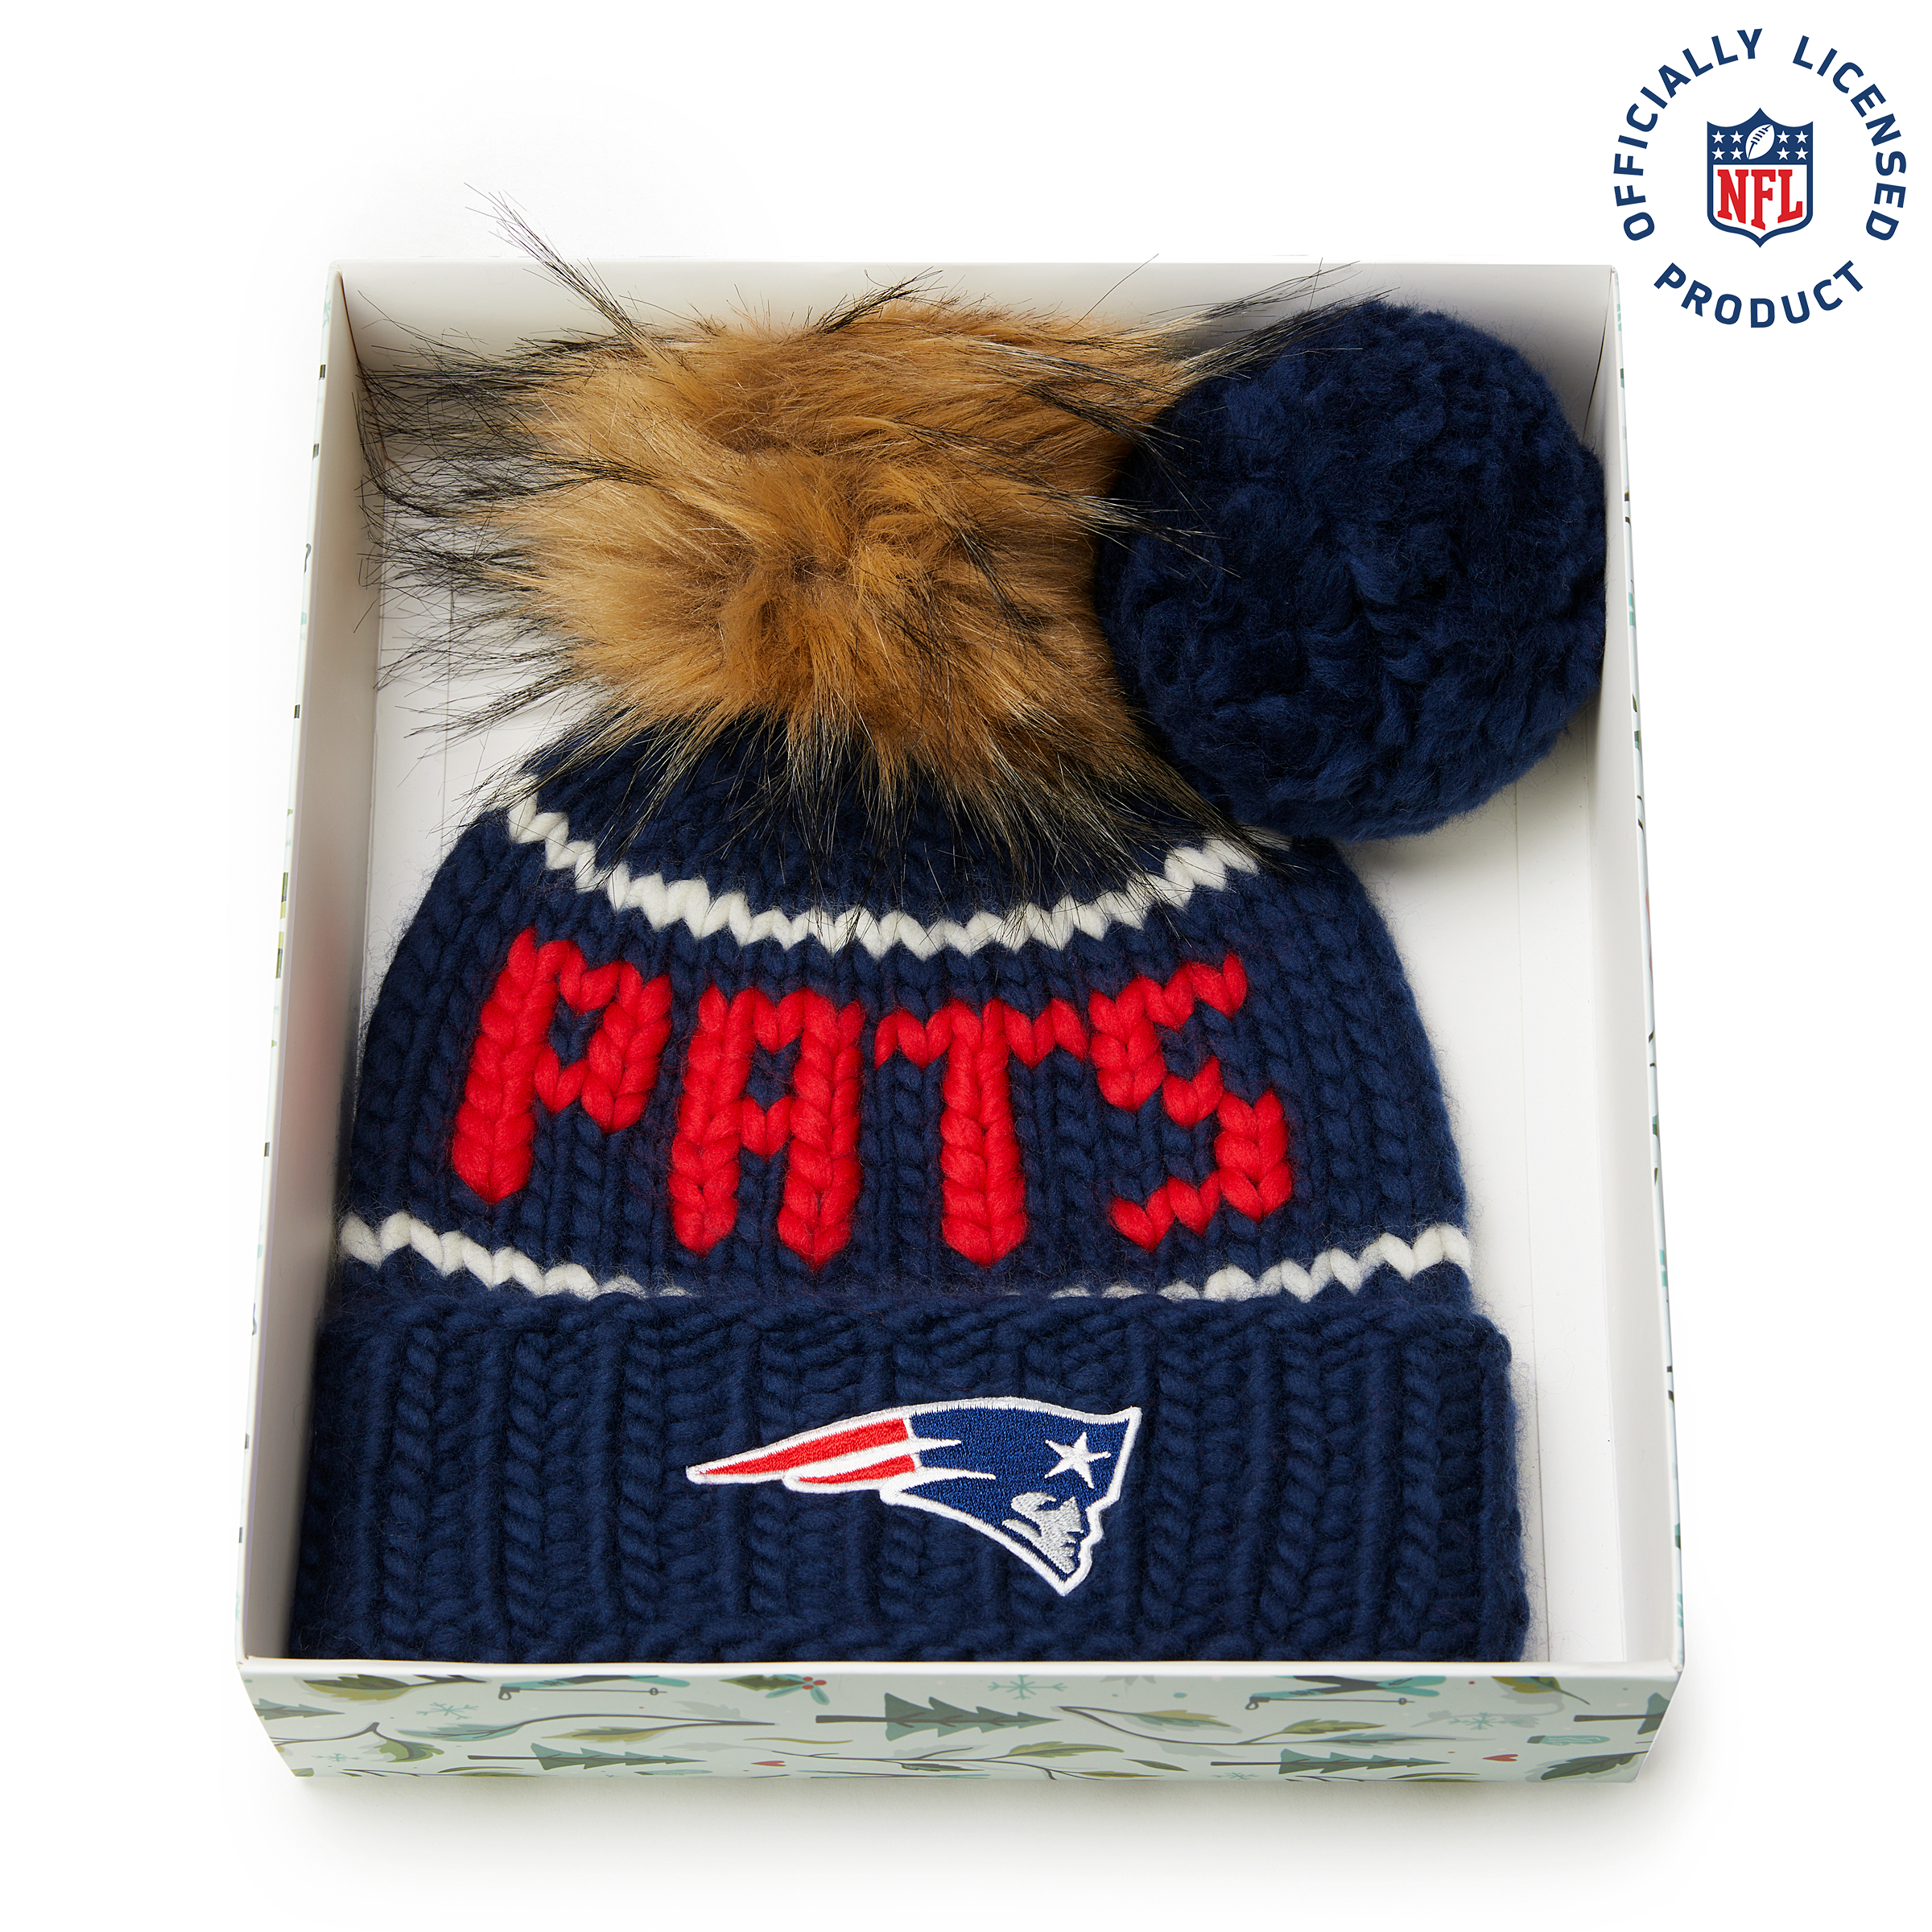 The Pats NFL Beanie Gift Set